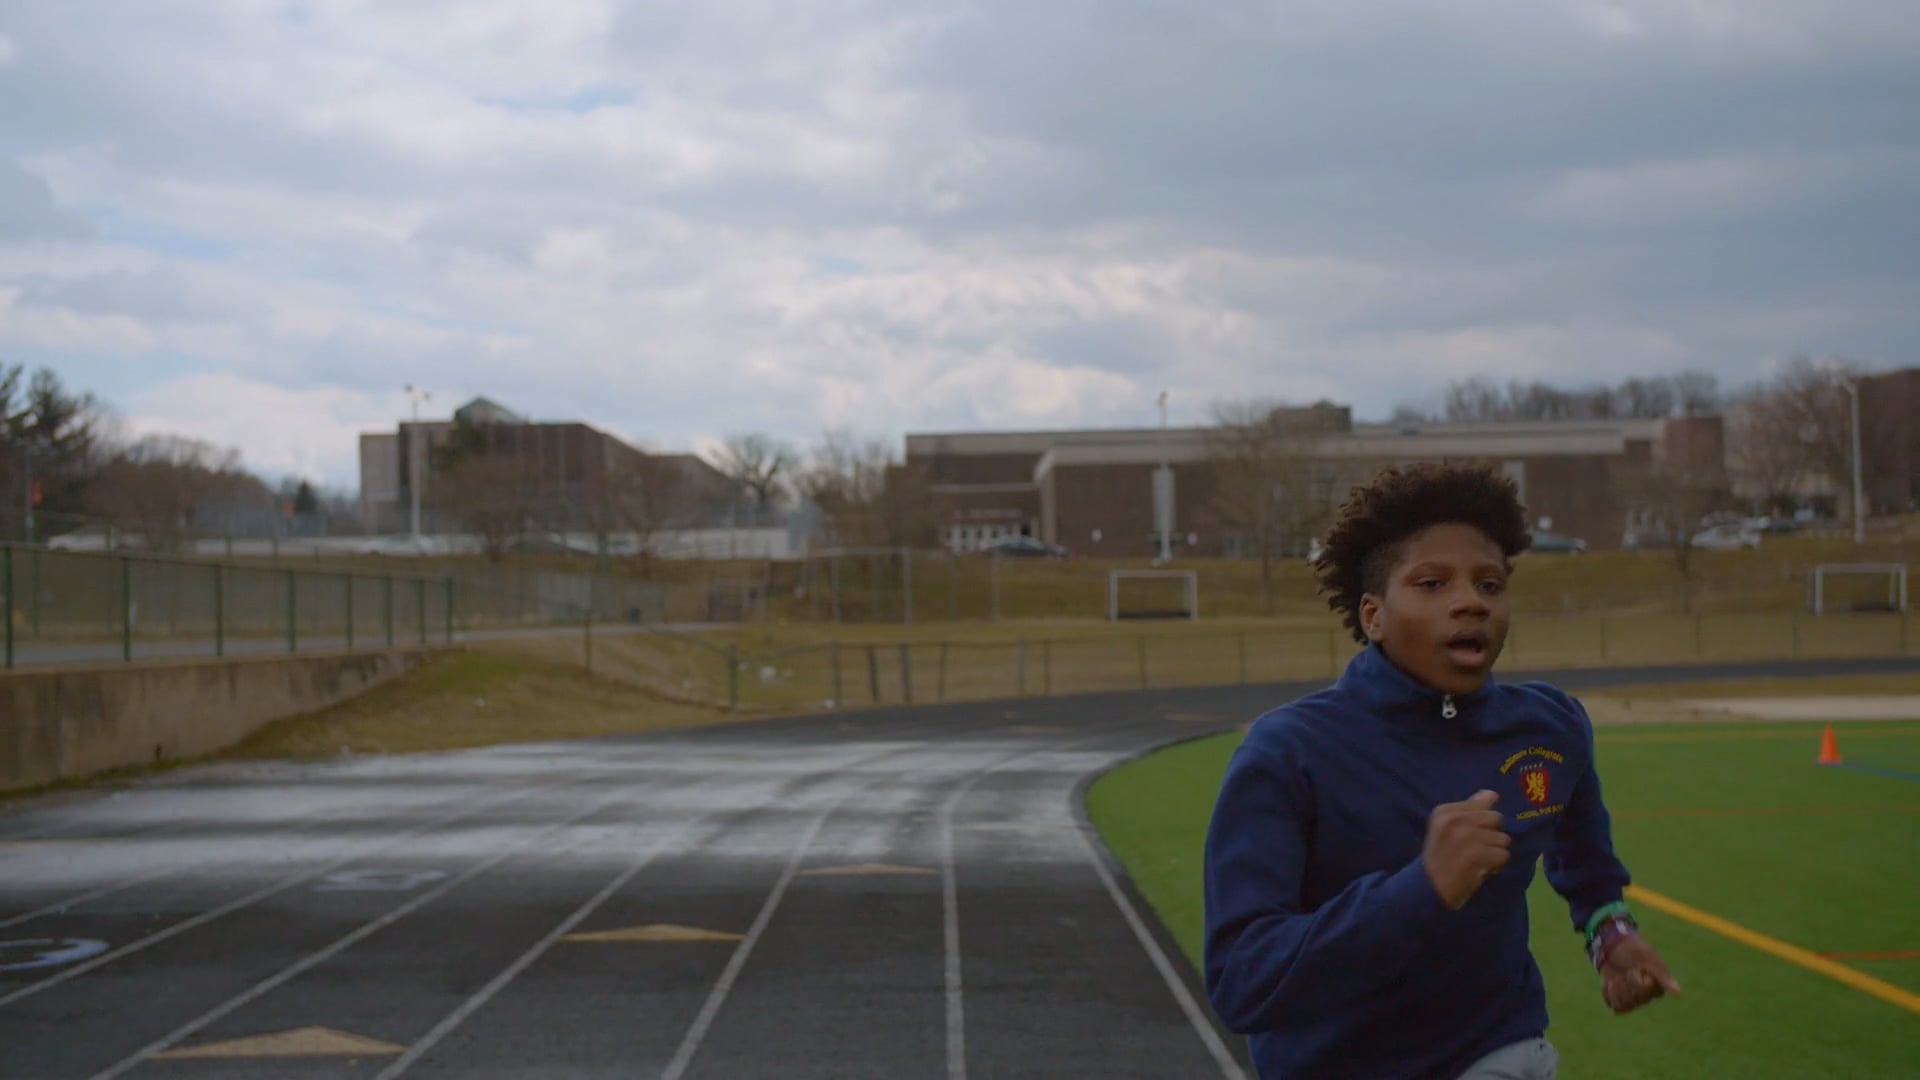 A Journey of Promise: Baltimore Collegiate School for Boys